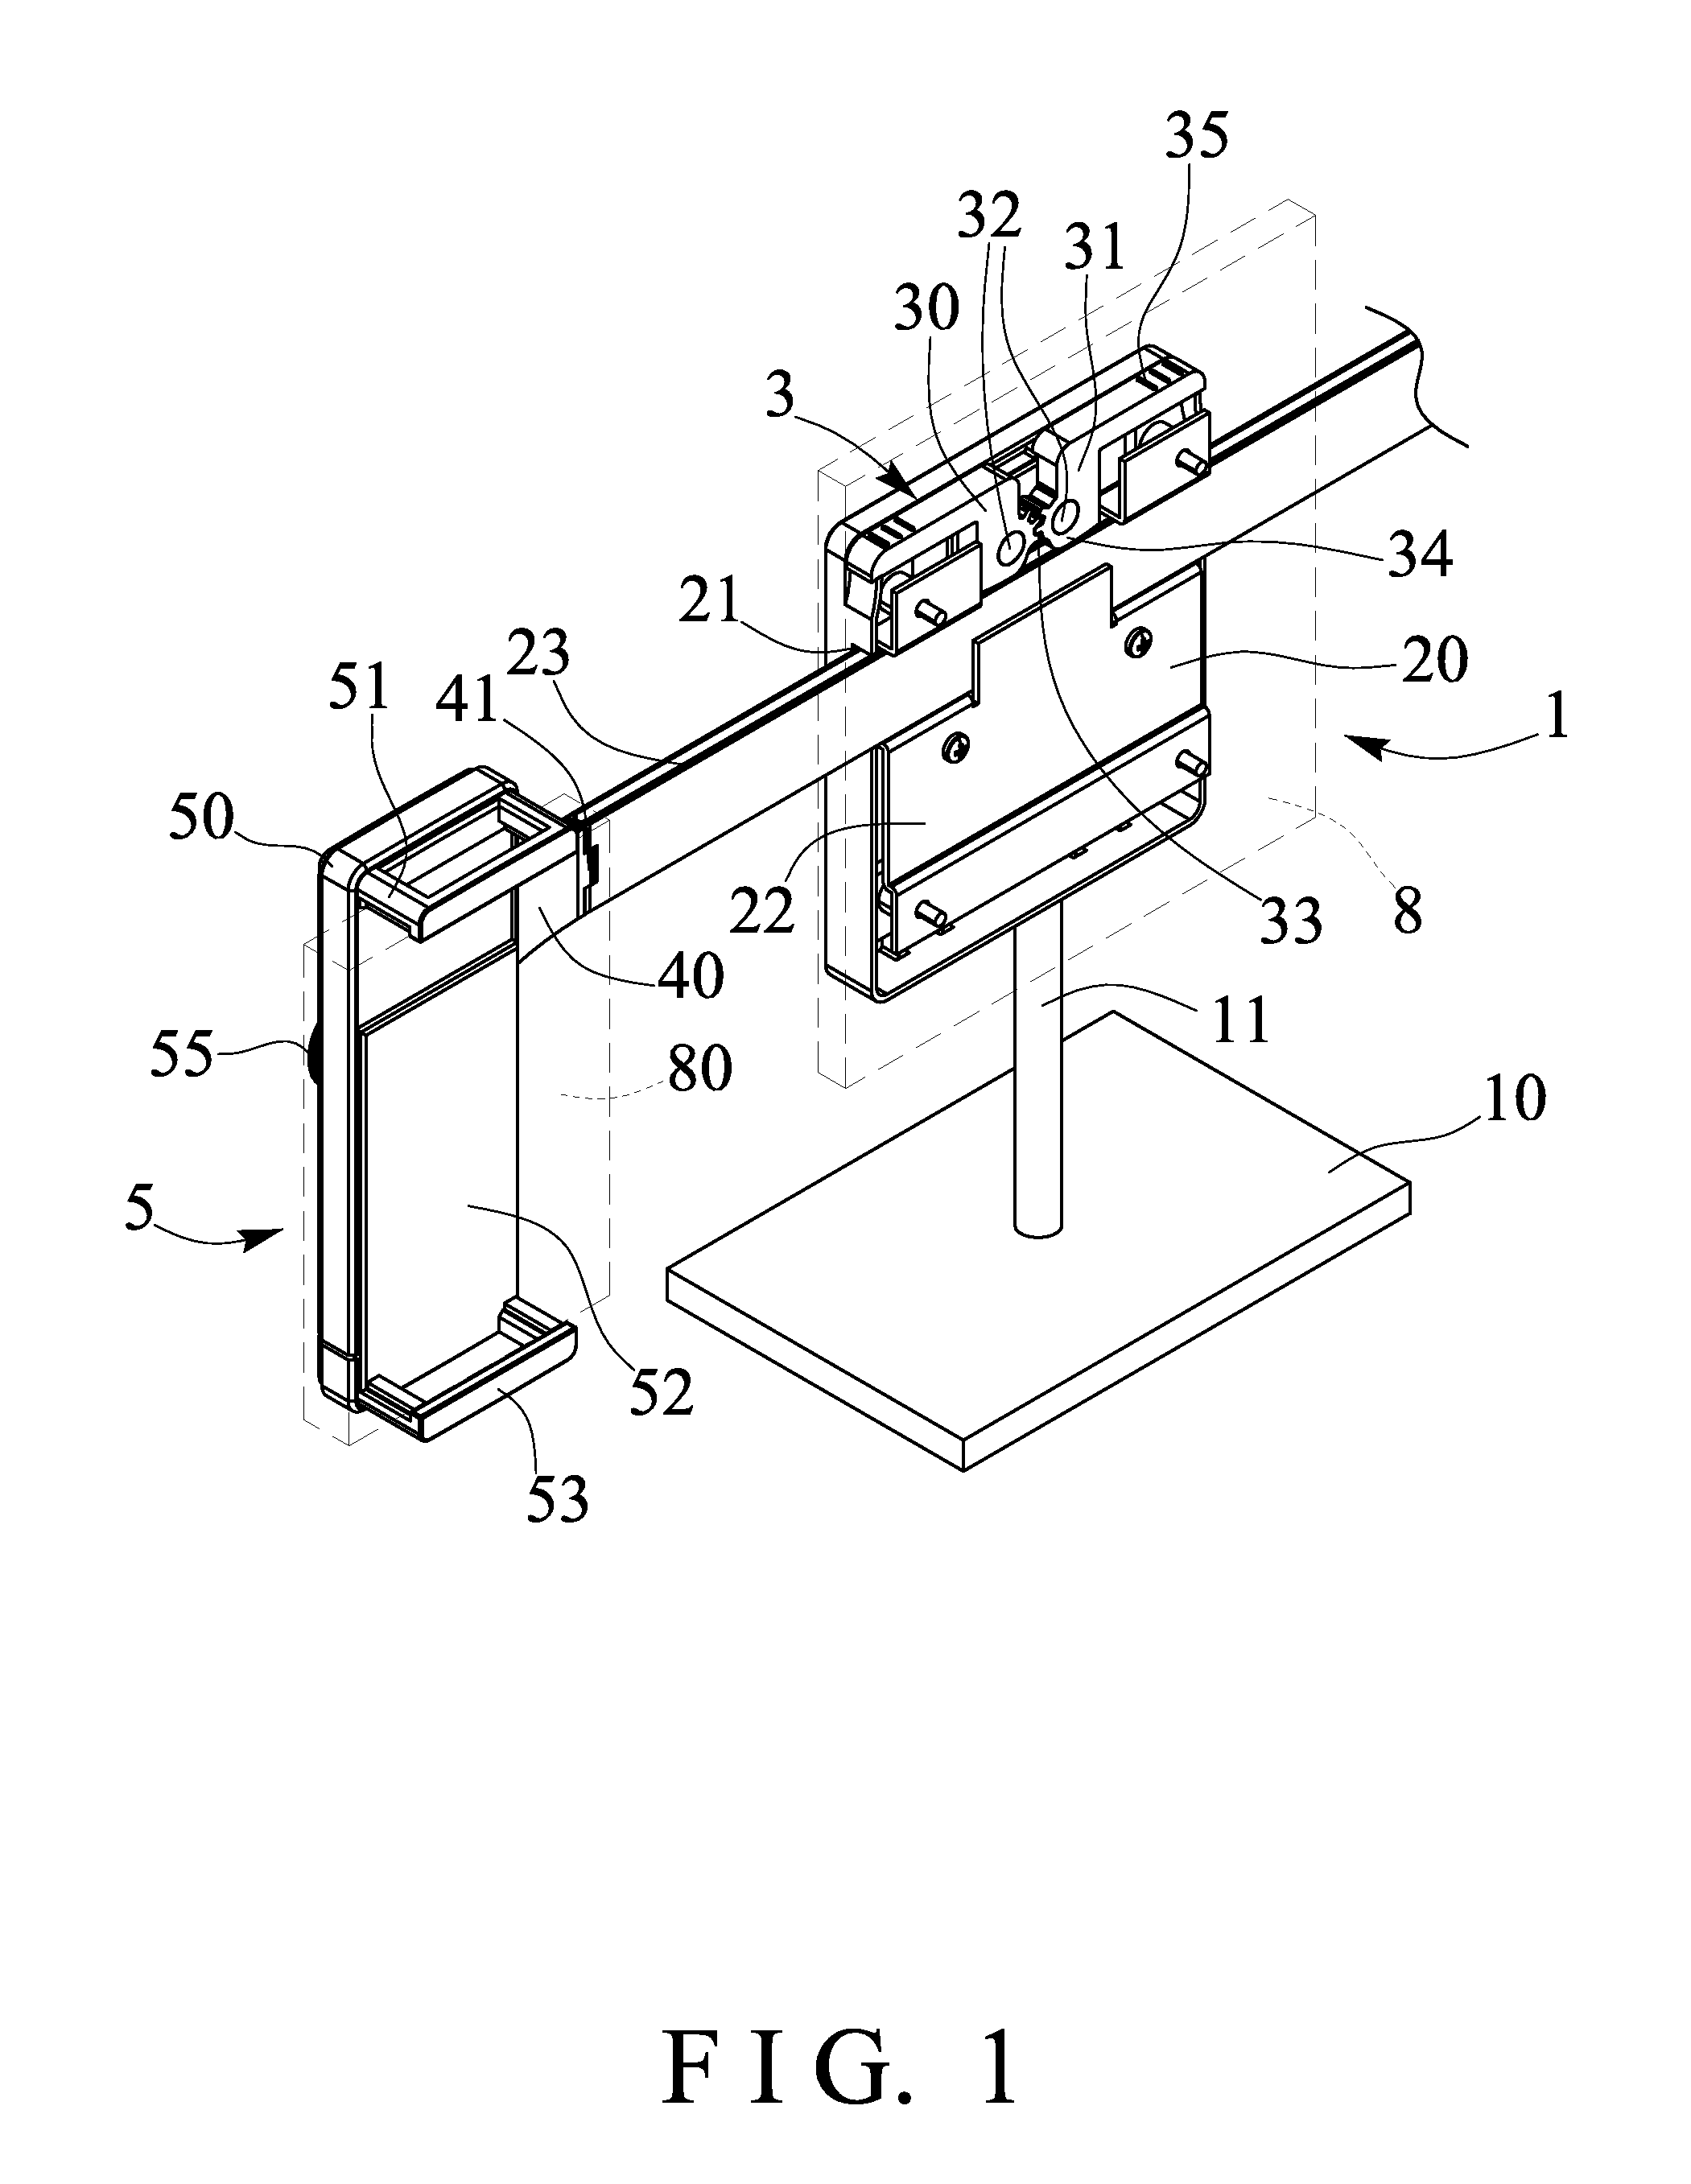 Carrier device for two or more articles